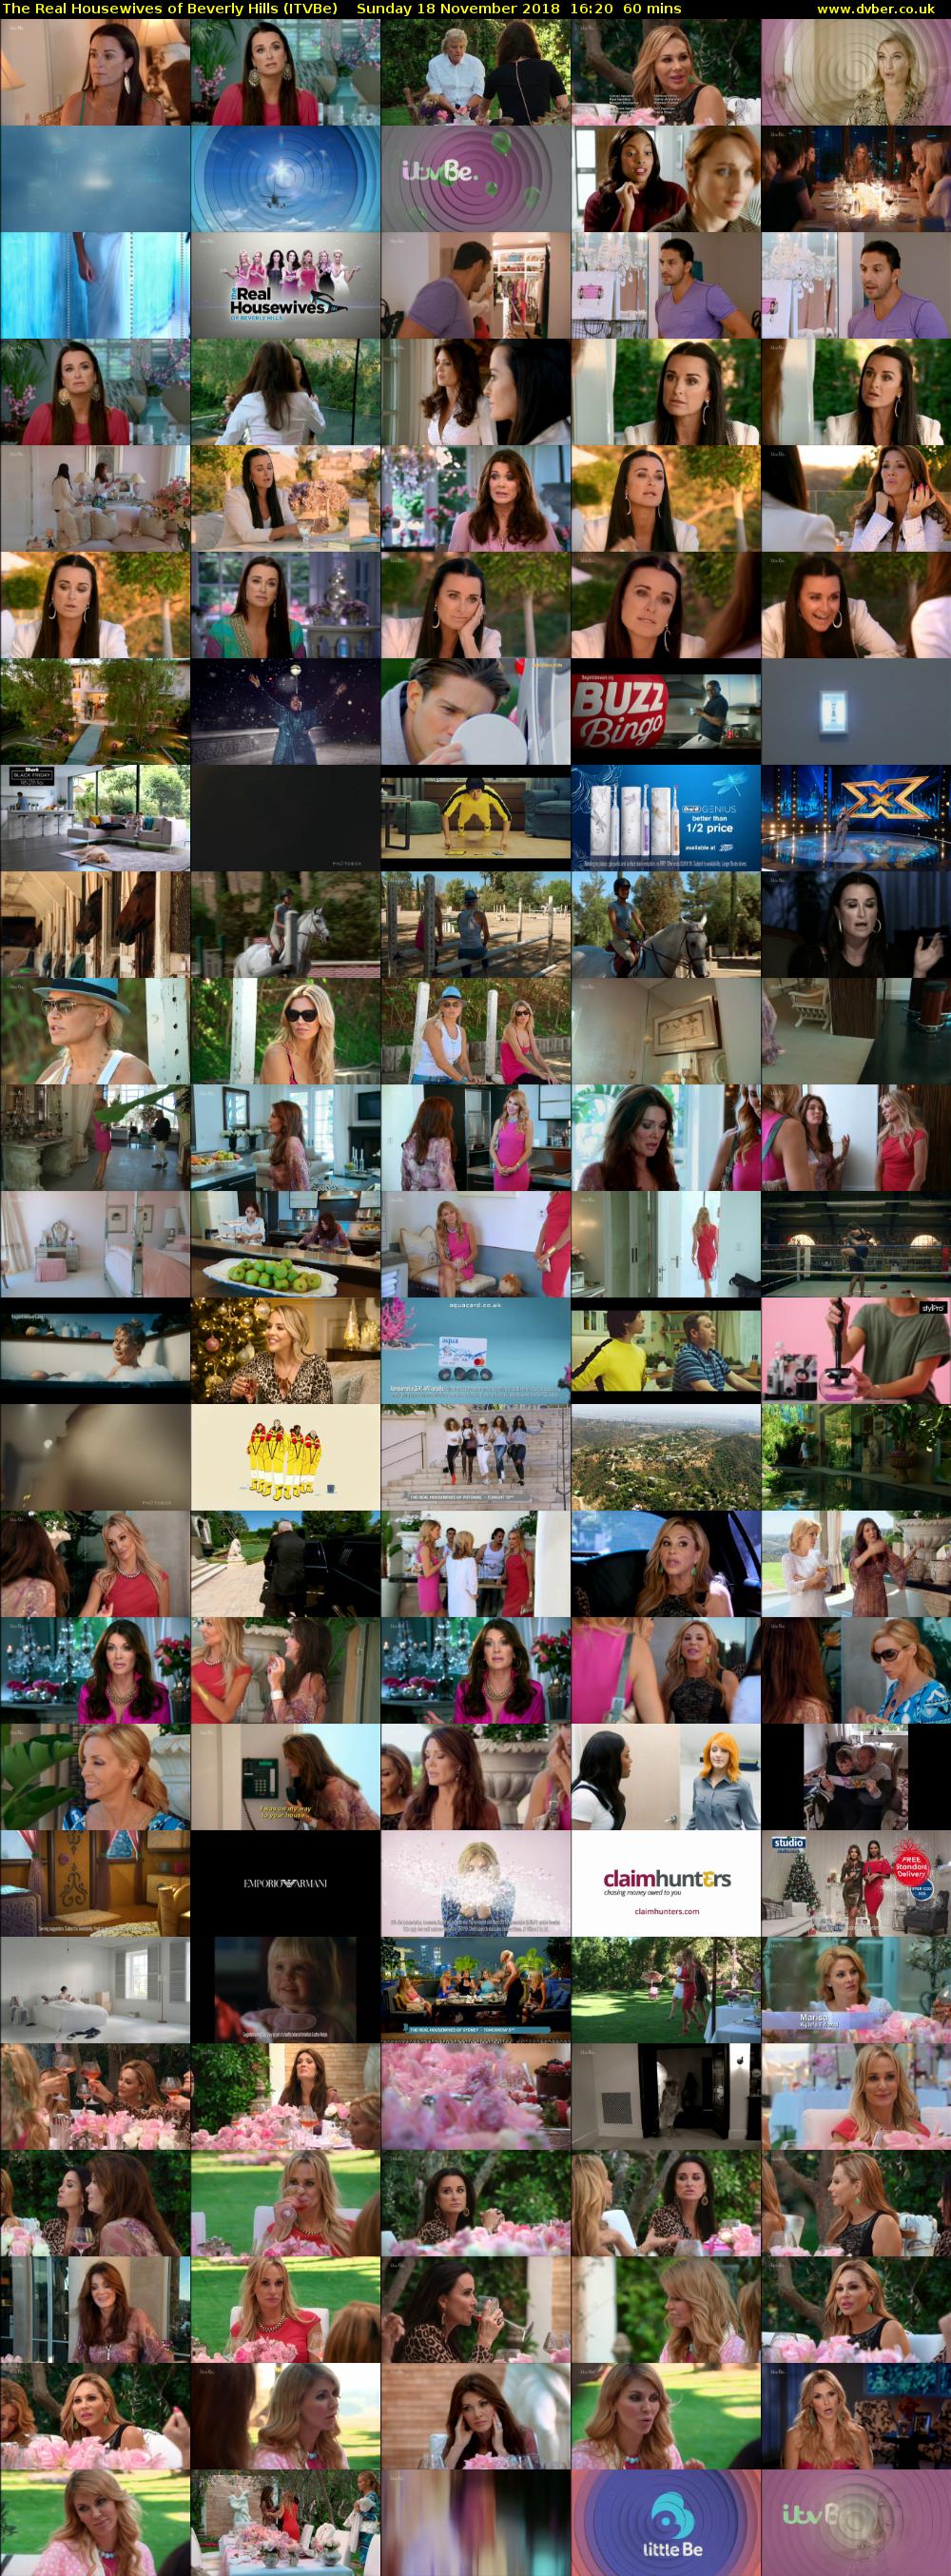 The Real Housewives of Beverly Hills (ITVBe) Sunday 18 November 2018 16:20 - 17:20